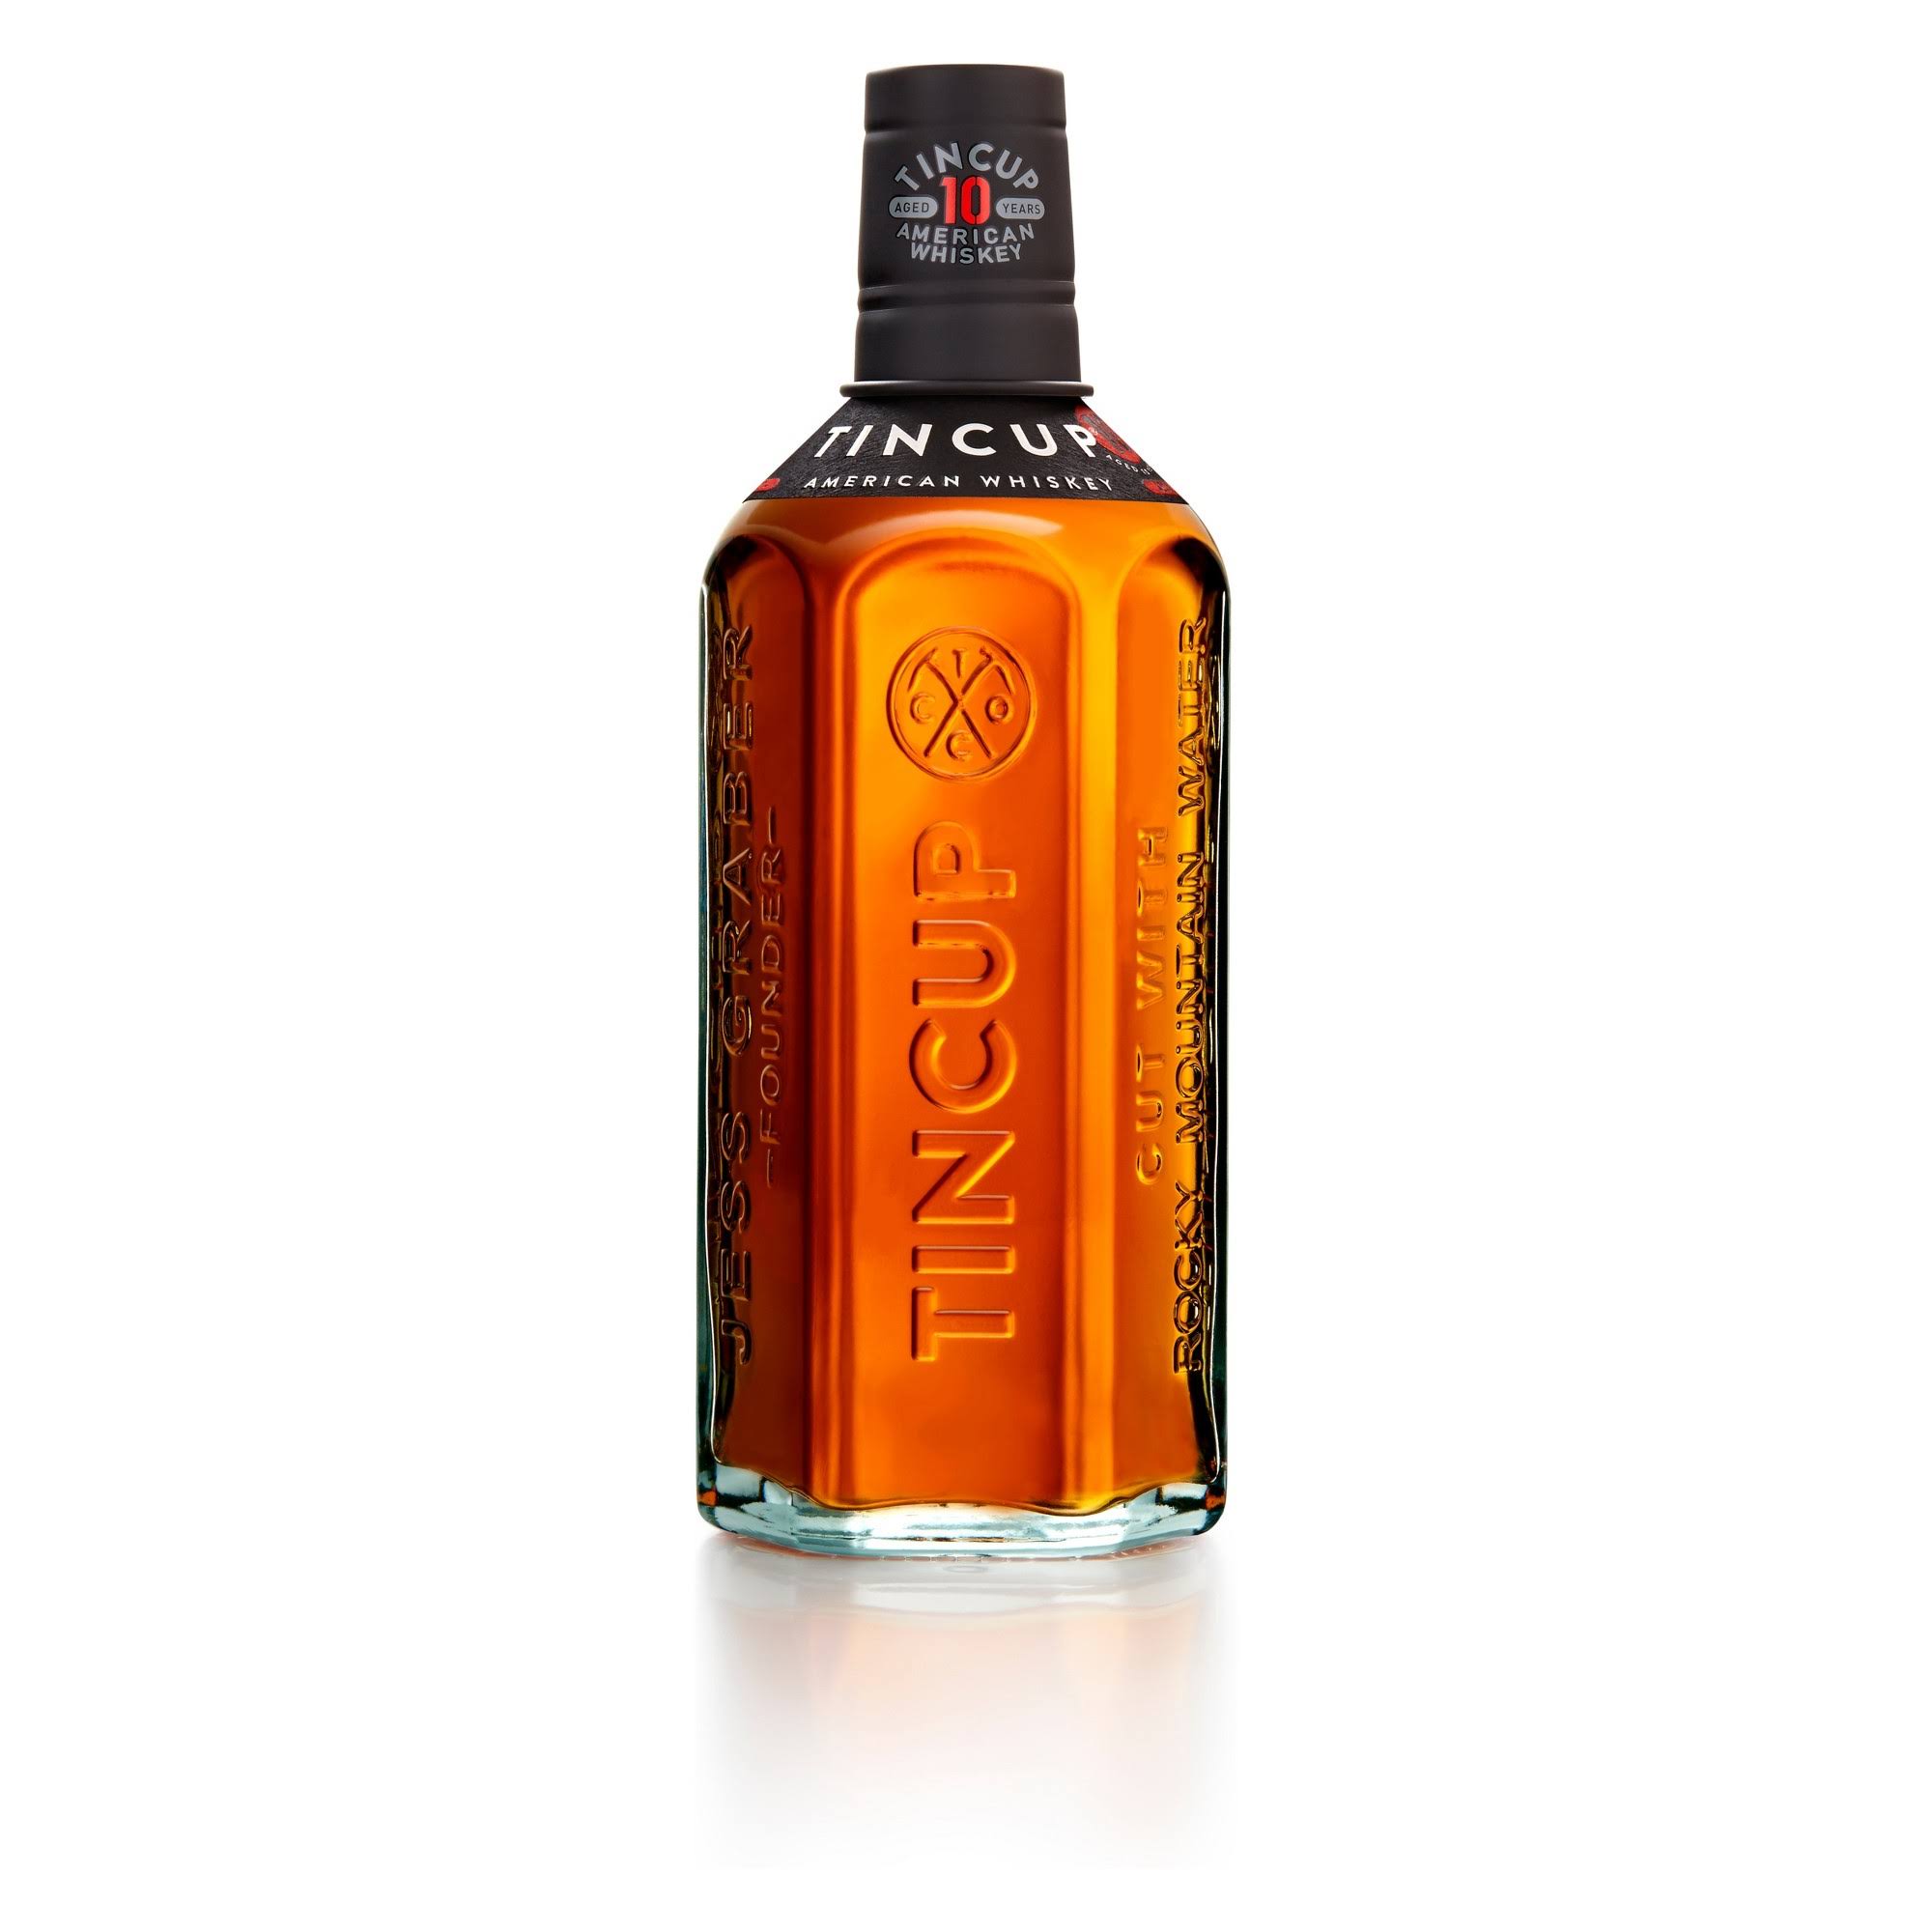 Tin Cup 10 Year Old American Whiskey - Colorado, USA